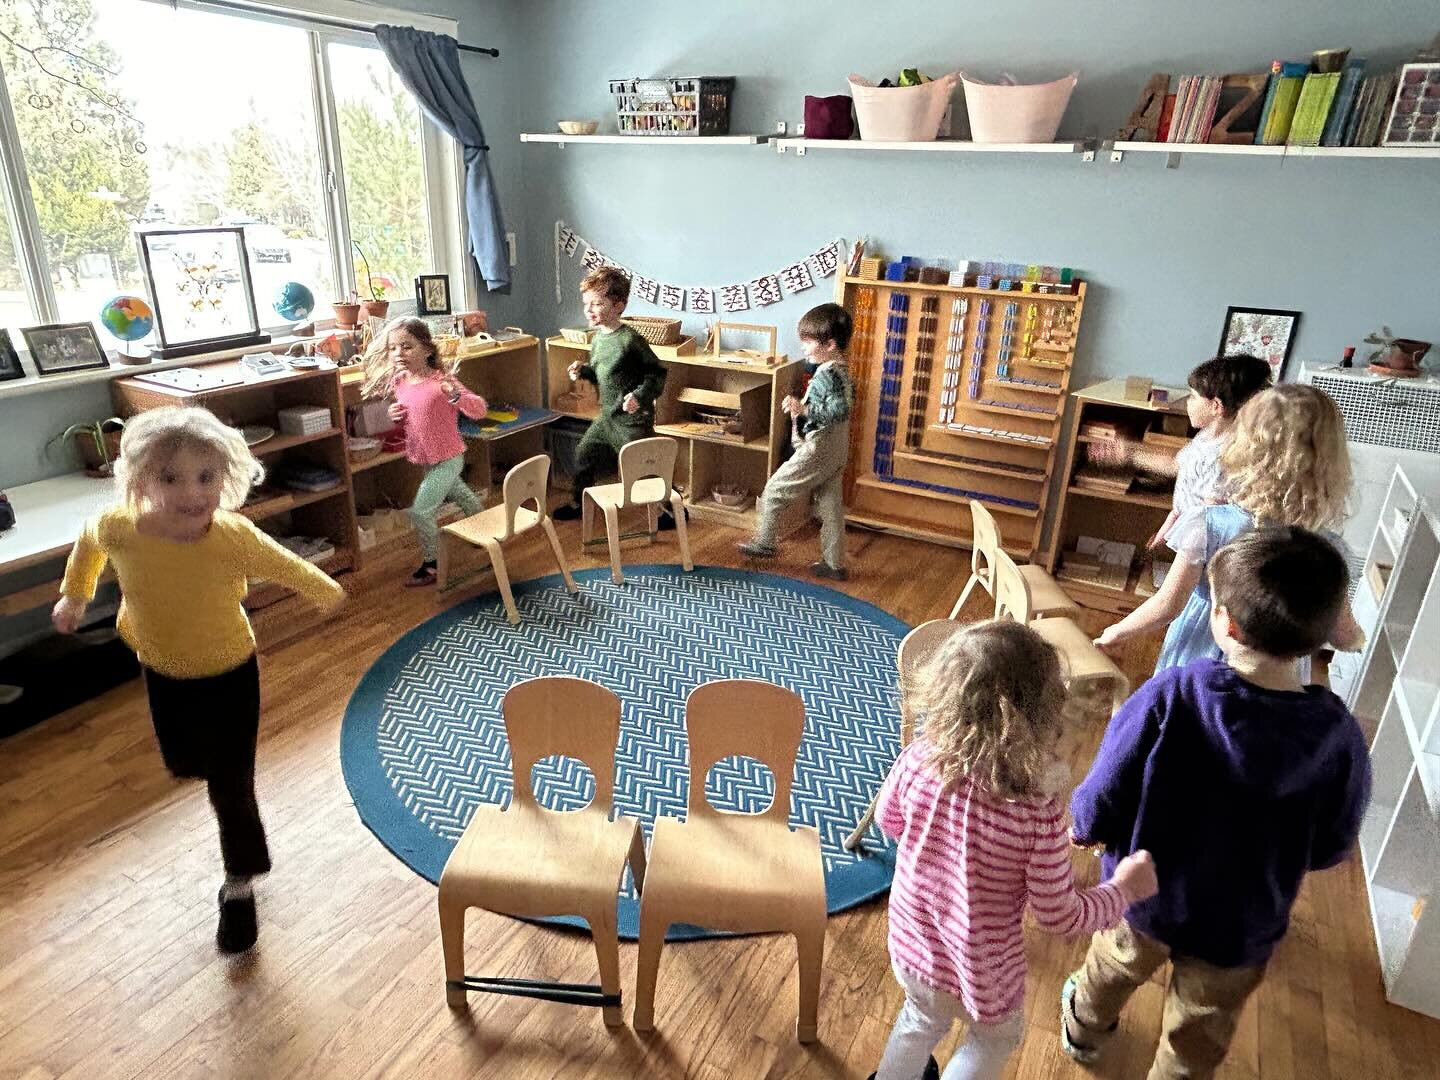 Musical chairs. 

So simple, so fun. 

The children are able to practice so many skills in this game: they help maneuver the furniture, they practice attention, inhibitory control, moving with grace and control, good sportsmanship, and plus some supe